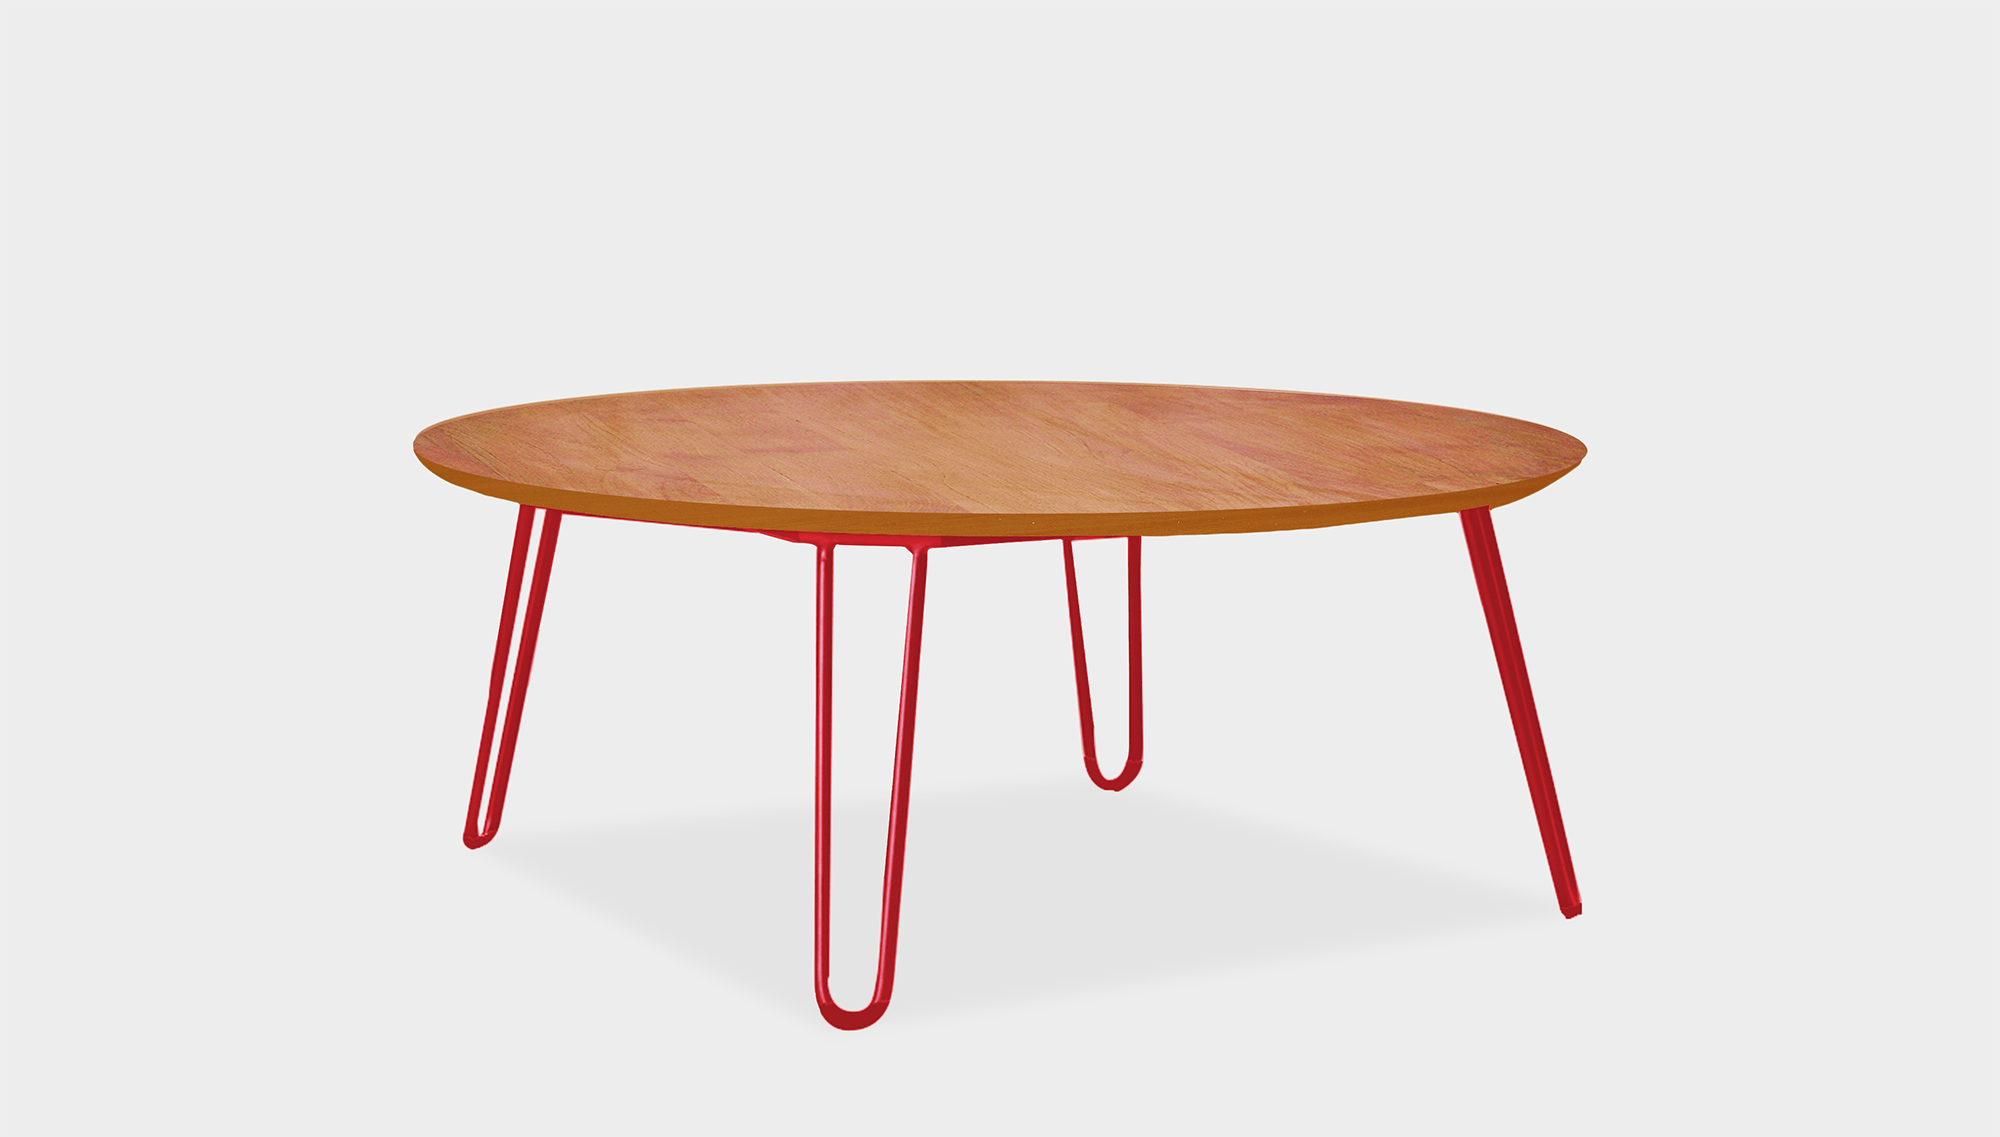 reddie-raw round coffee table 90dia x 35H *cm / Wood Teak~Natural / Metal~Red Willy Coffee Table Round